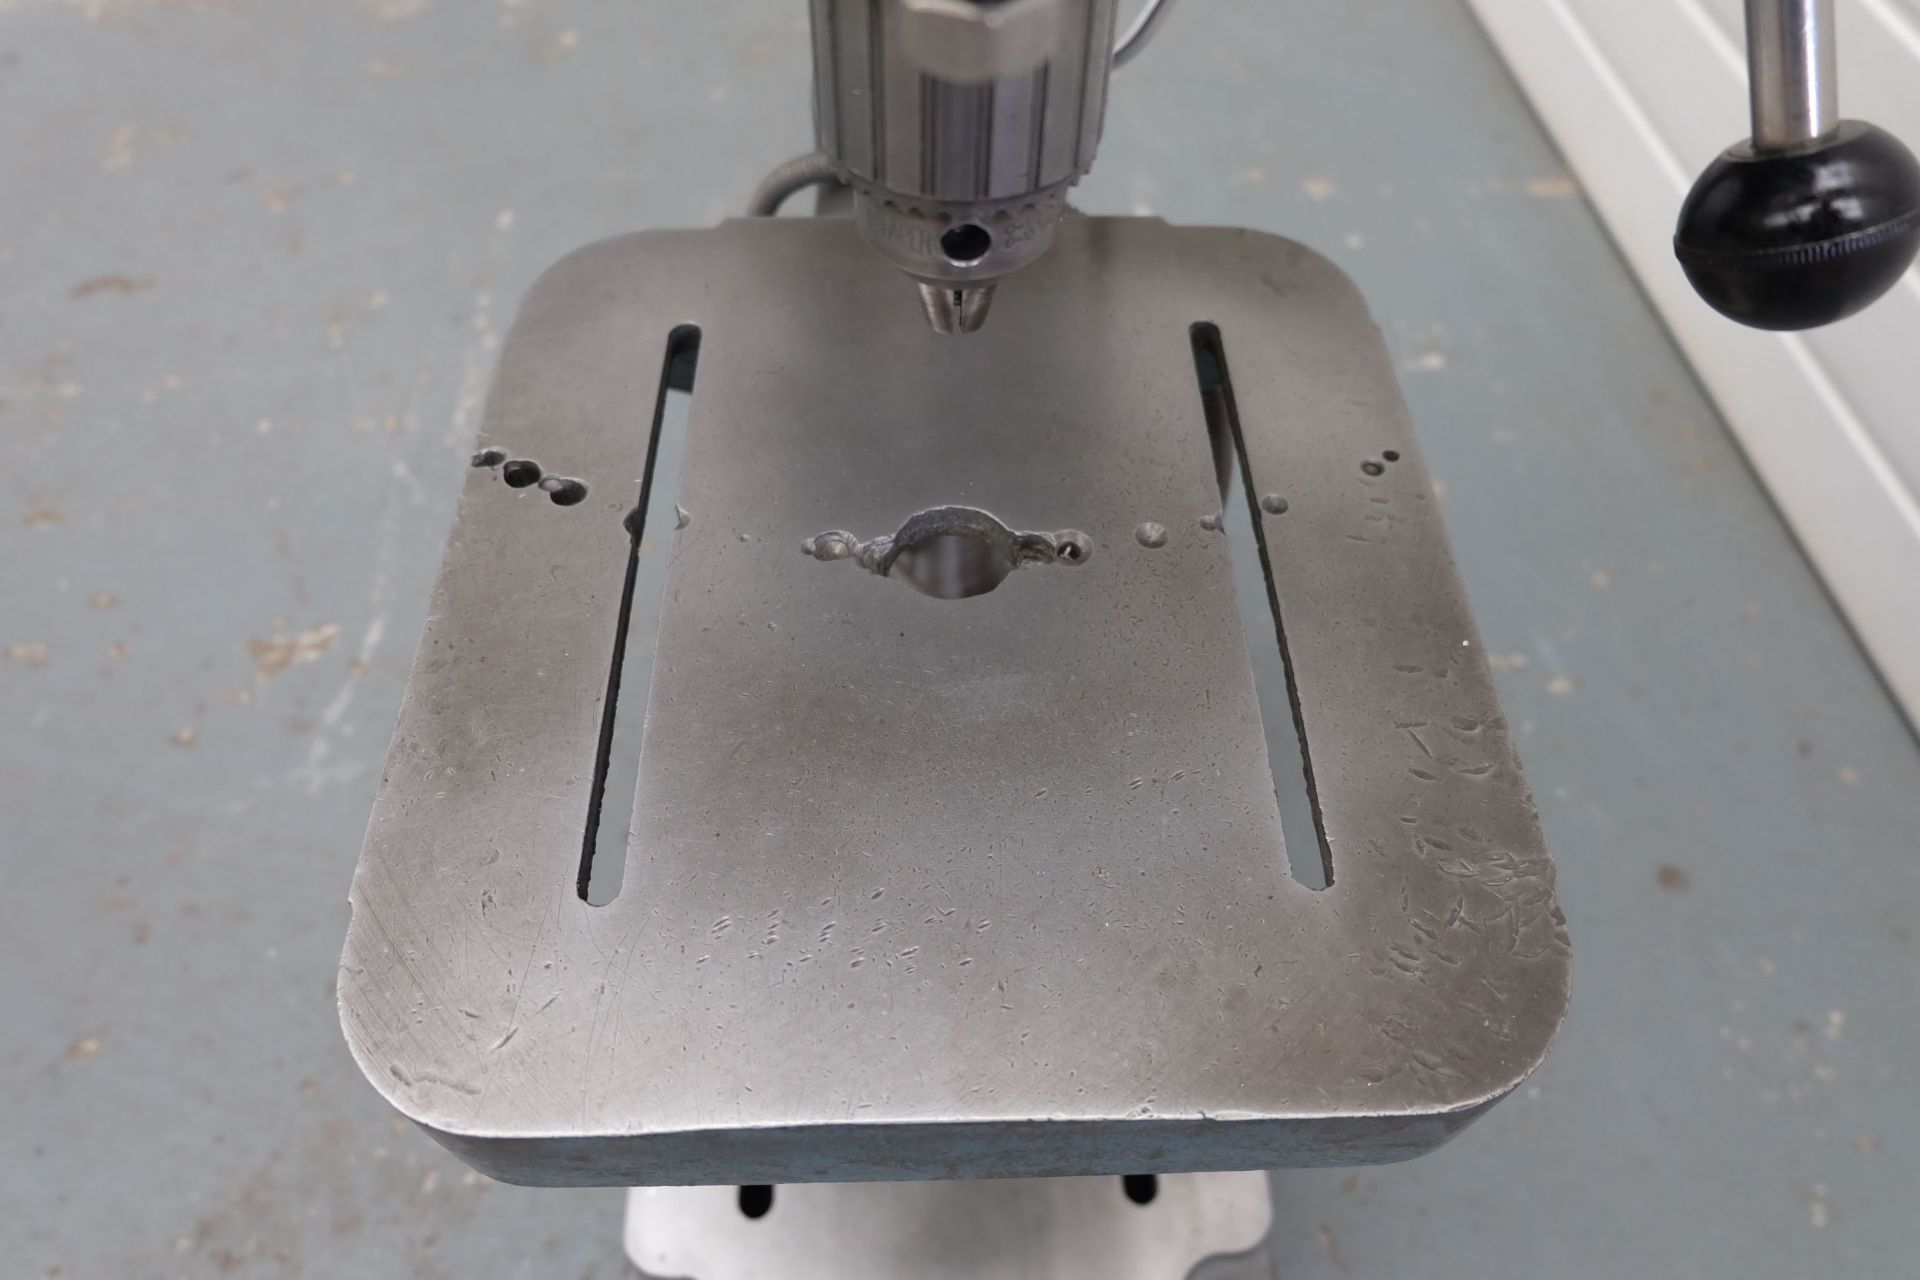 Meddings Type LB1 Bench Drill. - Image 4 of 6